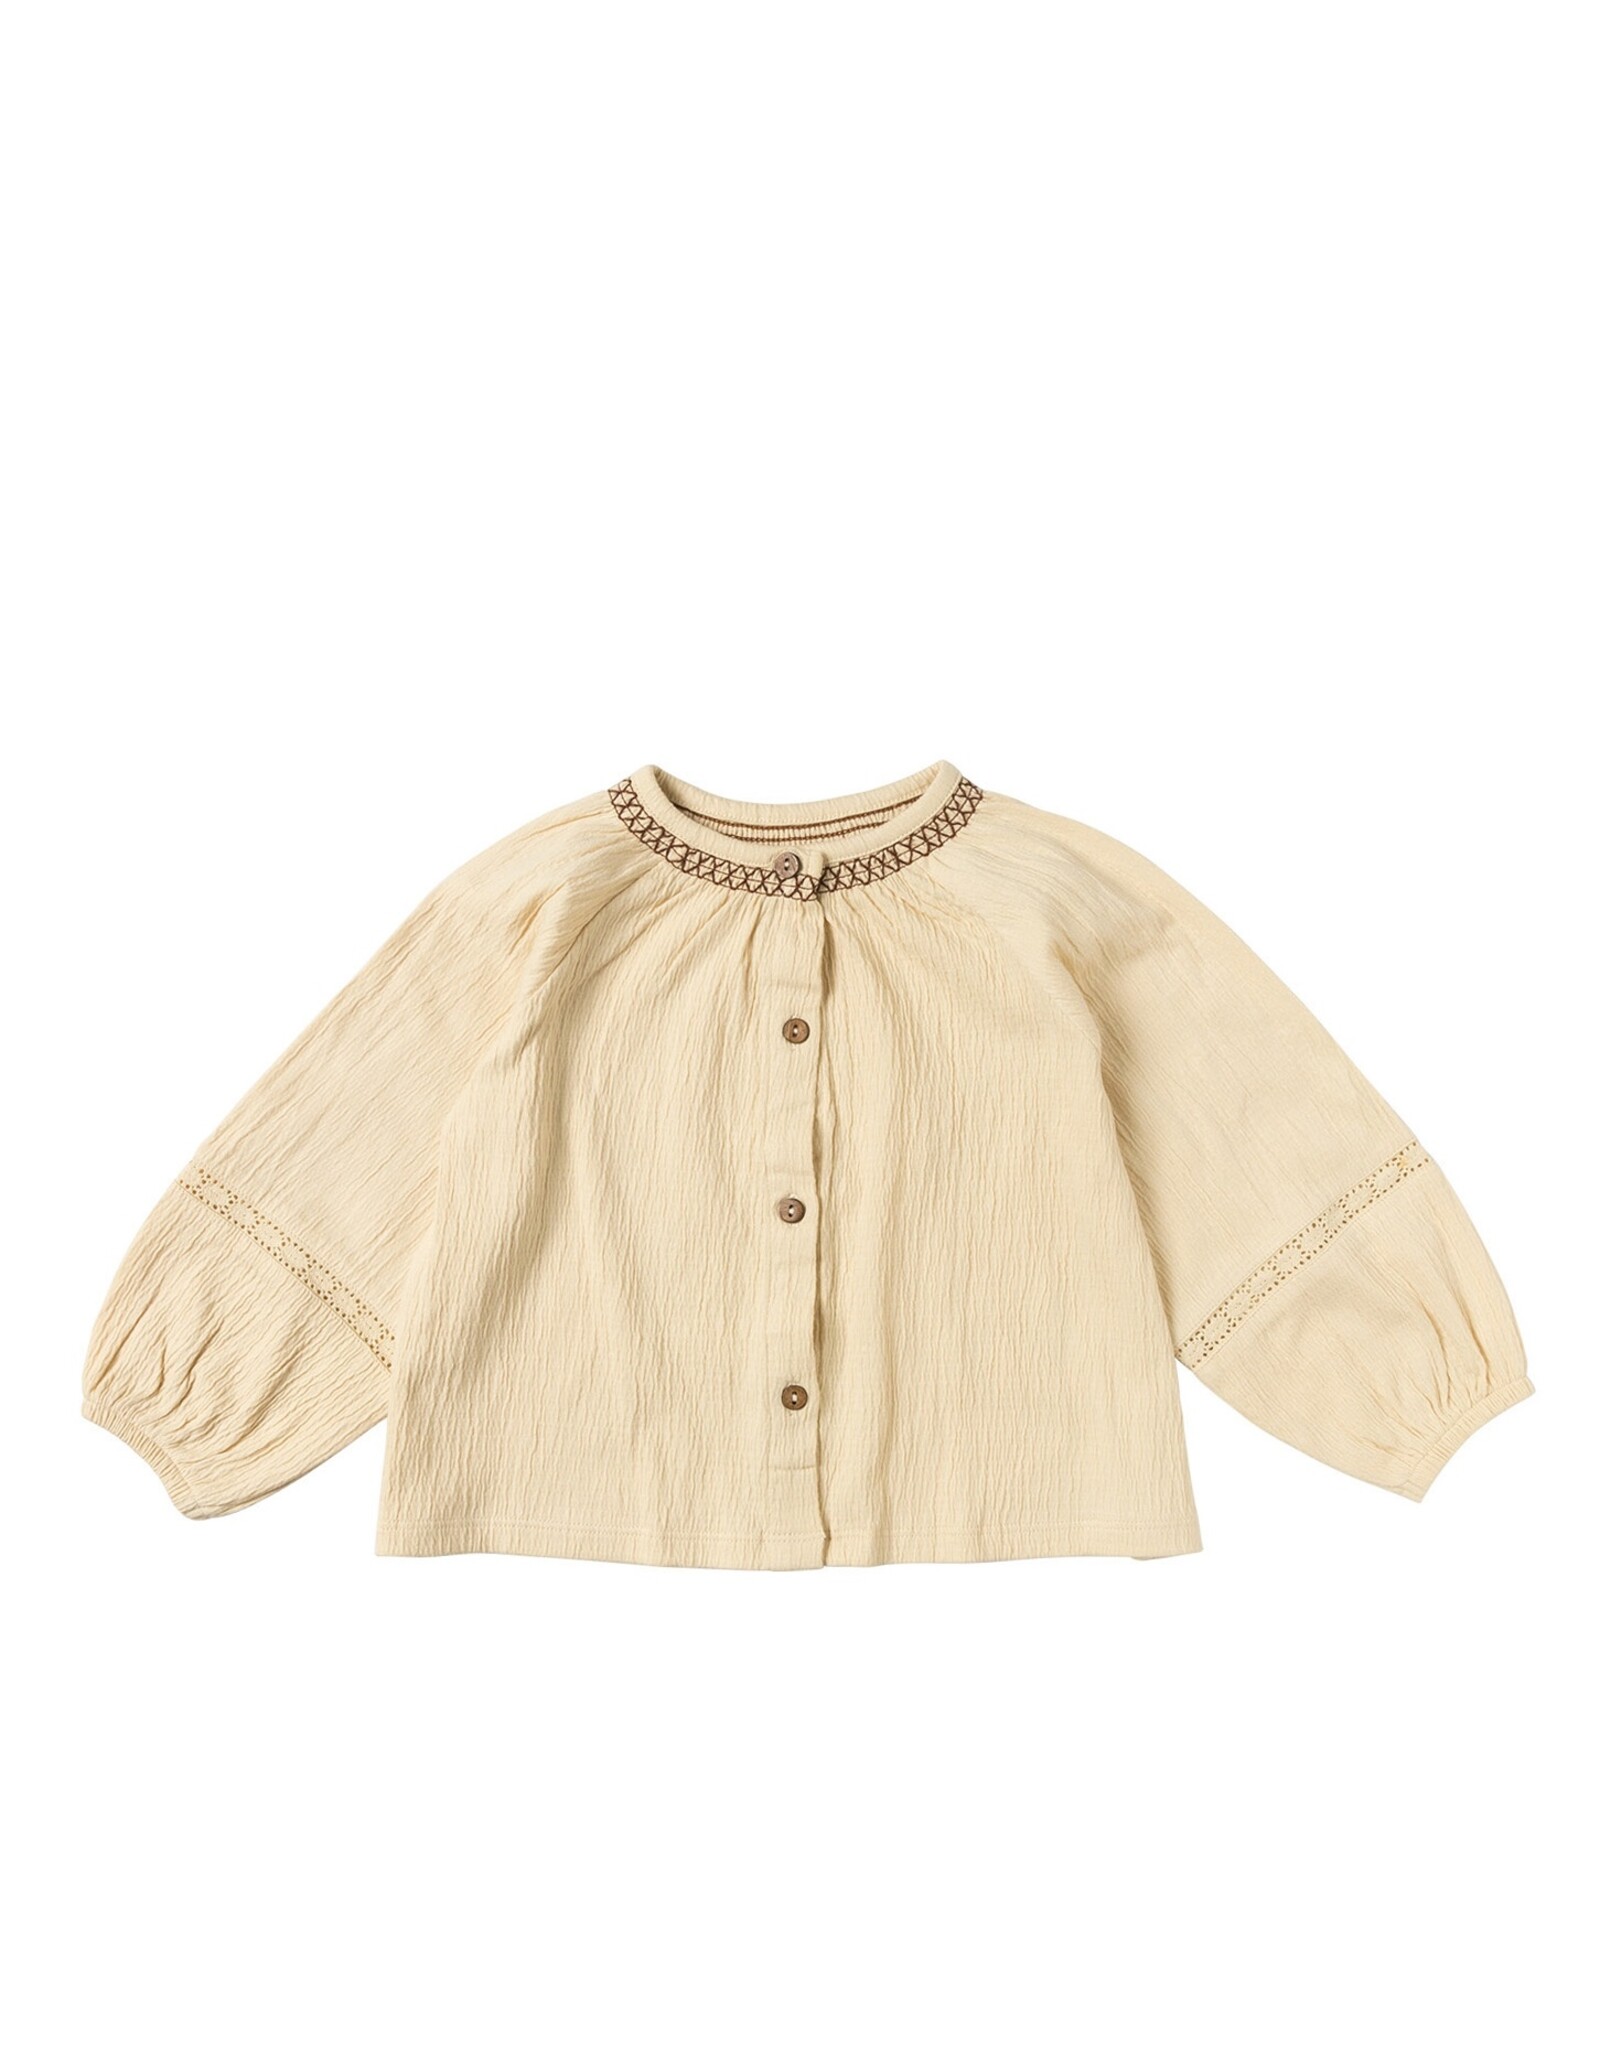 Your Wishes Blouses Wavy | Pola Honeycomb YSS24-065PBT